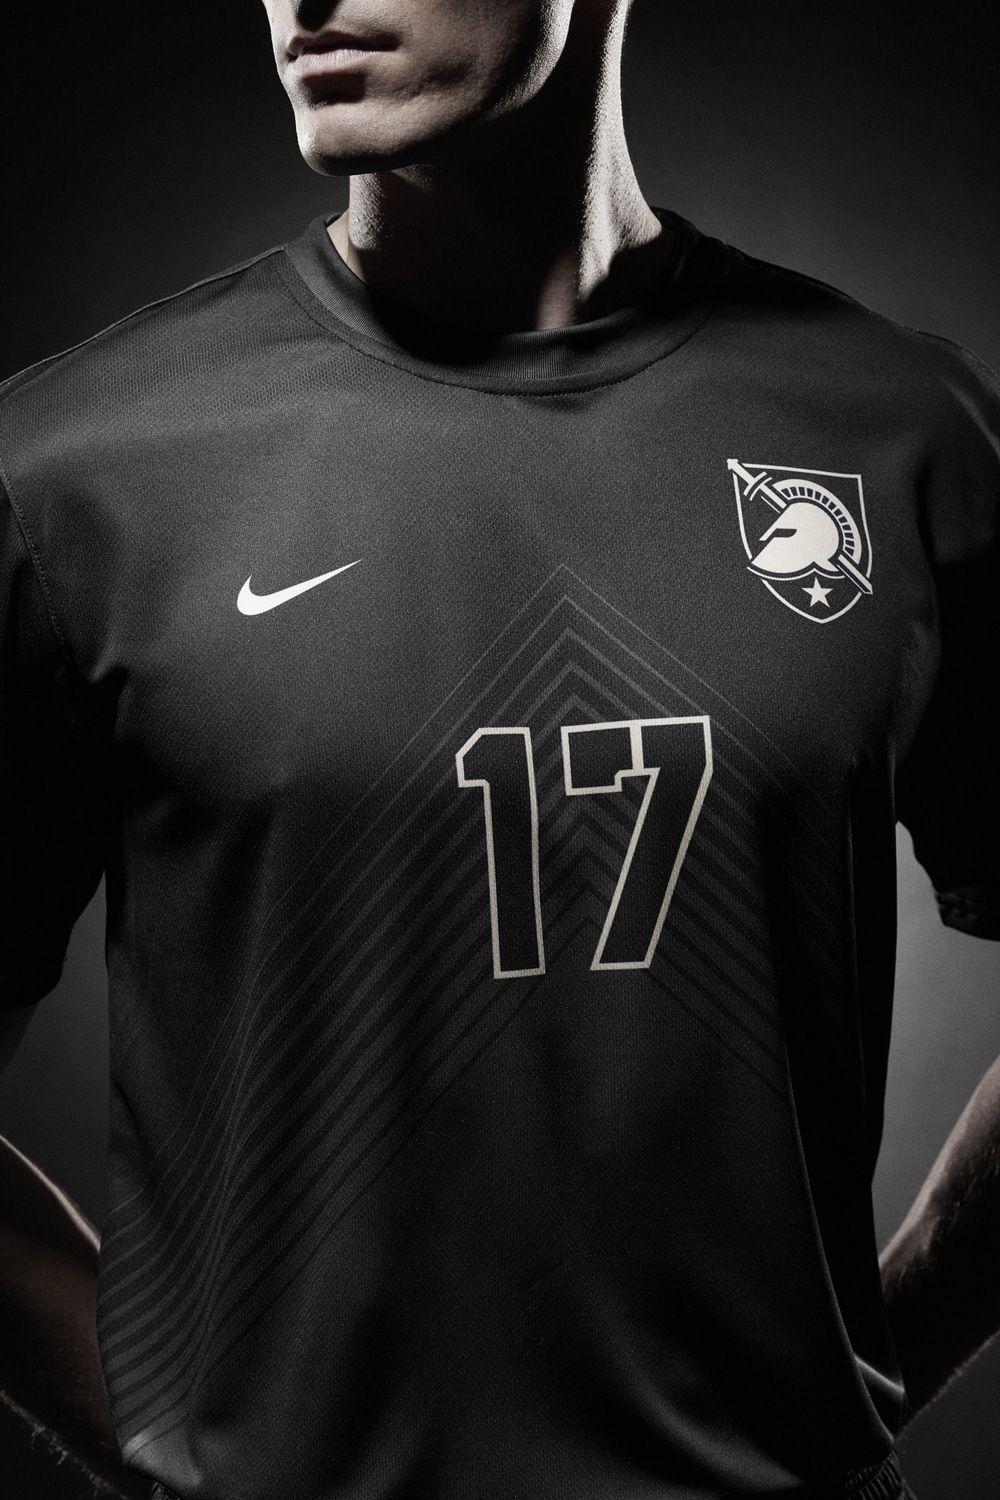 Nike Army Logo - New Logo and Uniforms for Army West Point Athletics